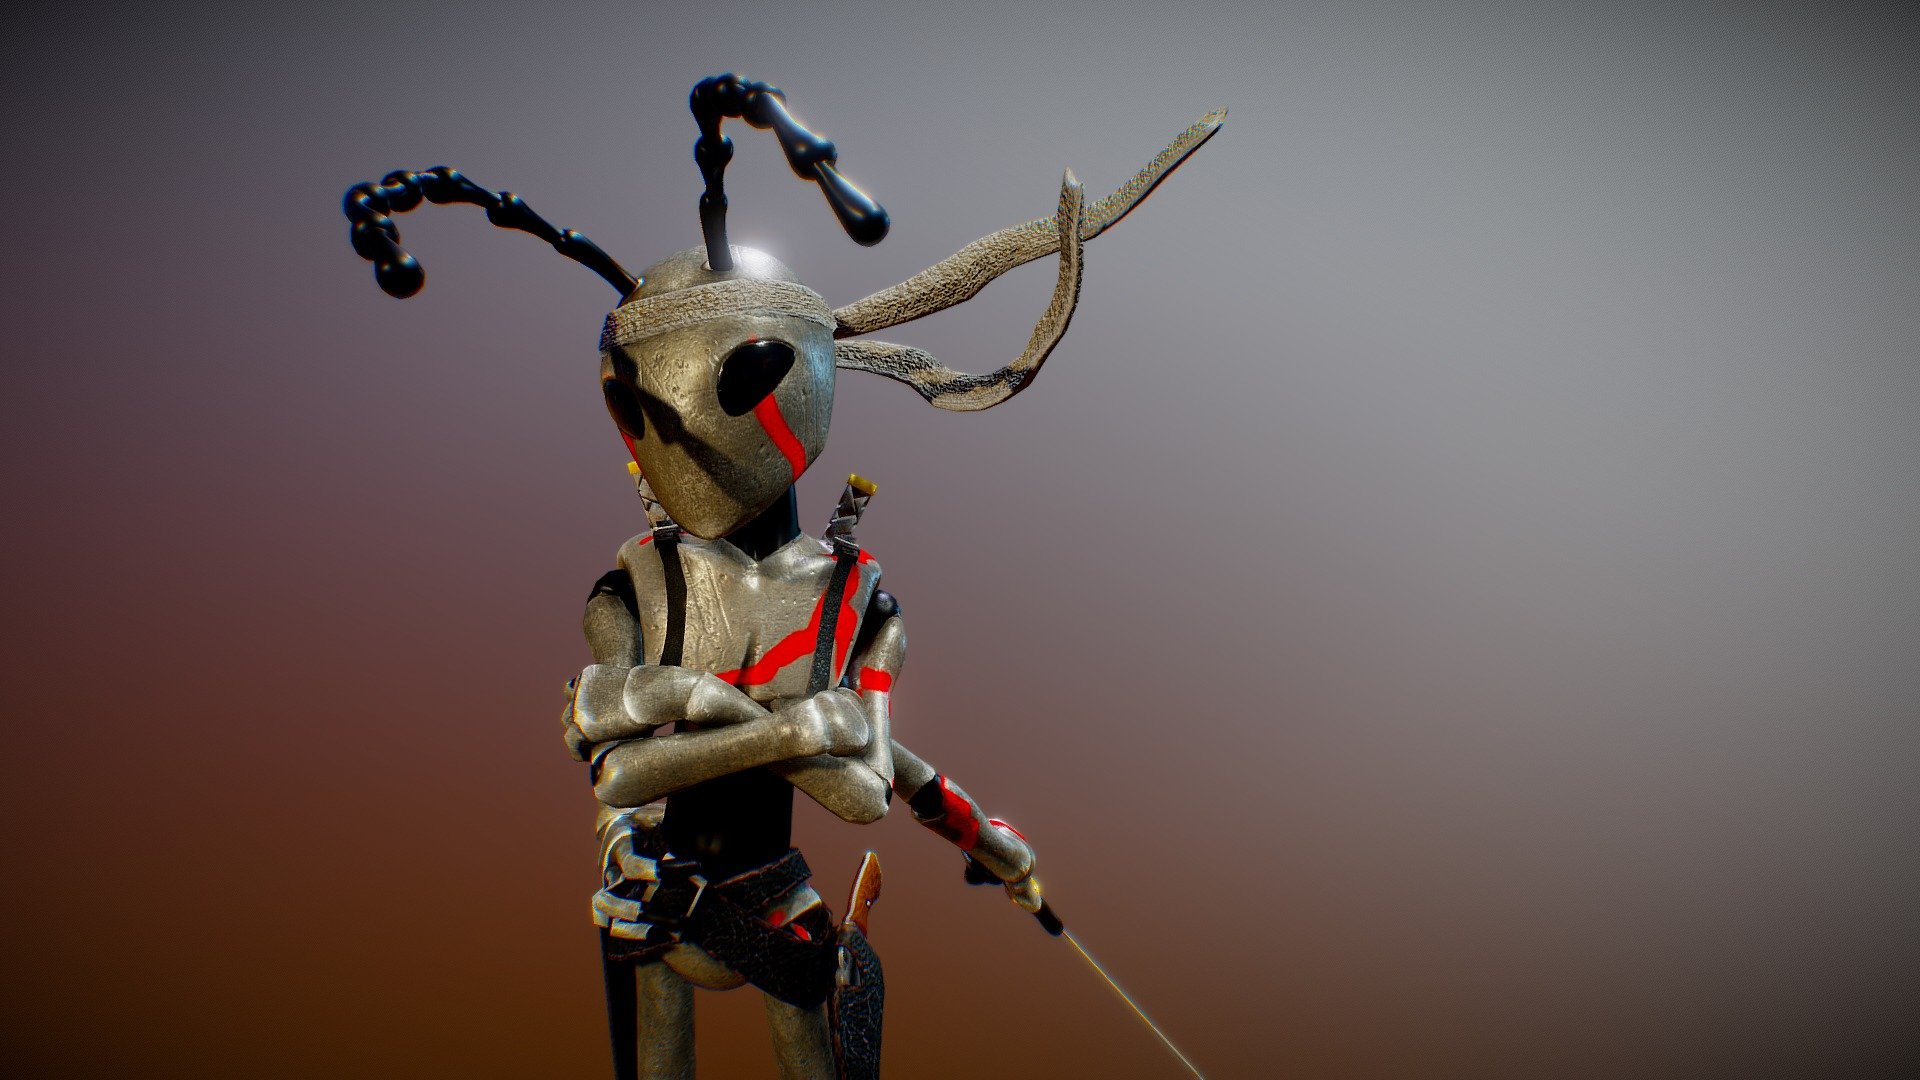 Character Mascot Done for Blackant Master Studio - Blackant Master 2016 - 3D model by BlackantMaster 3d model